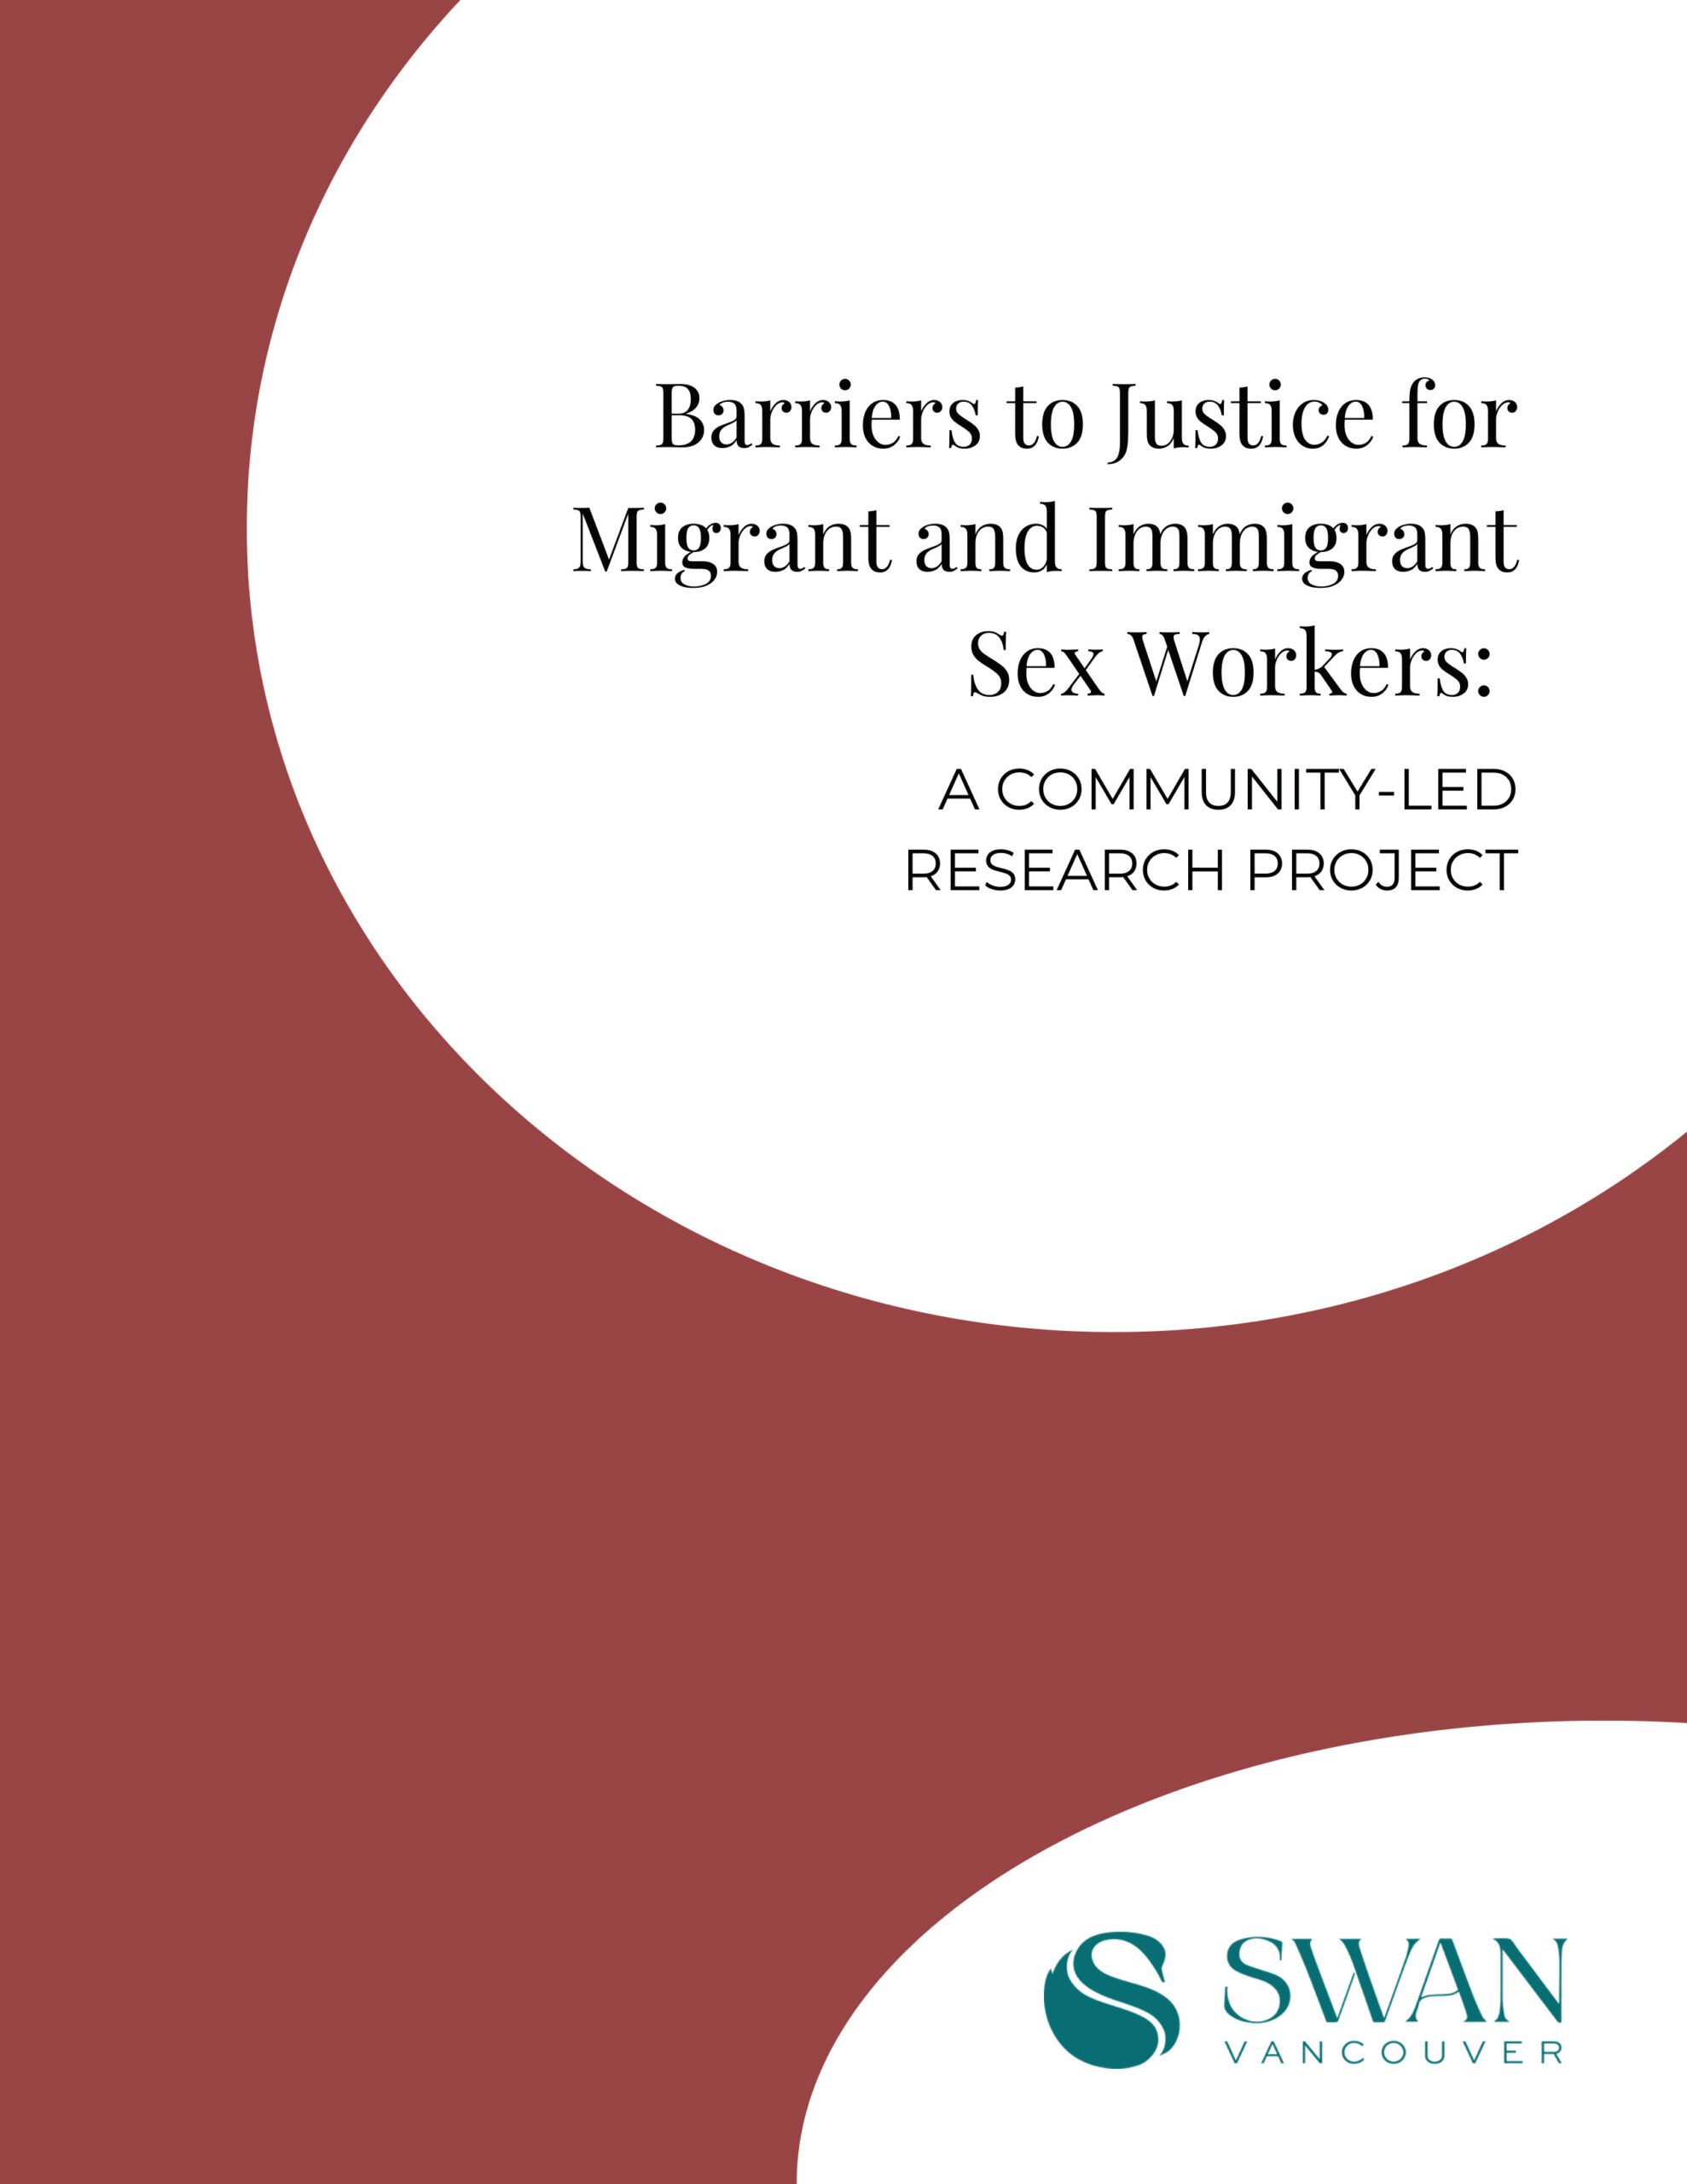 Barriers to Justice for Migrant and Immigrant Sex Workers